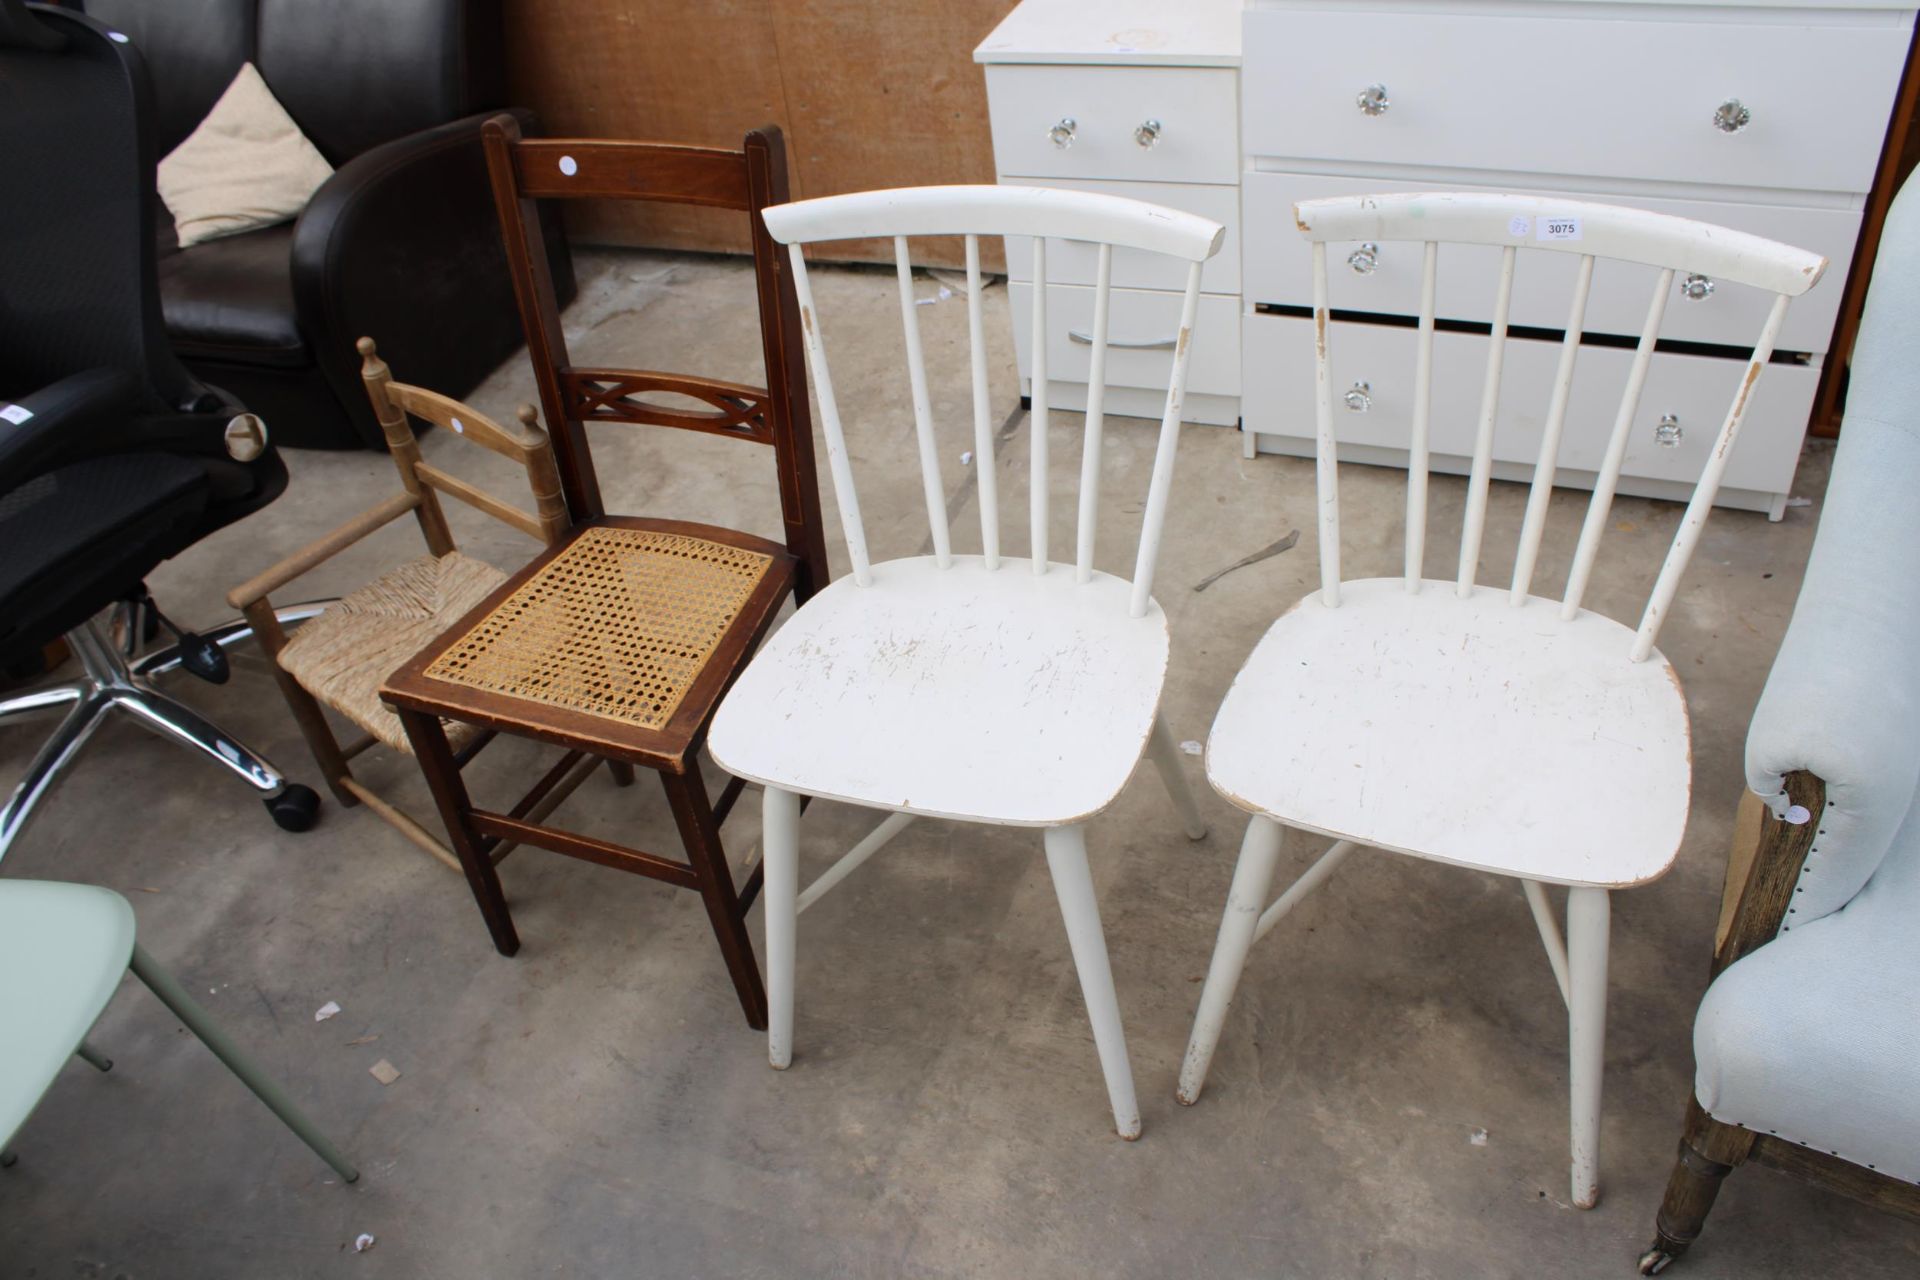 A PAIR OF WHITE ERCOL STYLE CHAIRS, A BEDROOM CHAIR AND A CHILDS CHAIR WITH A RUSH SEAT